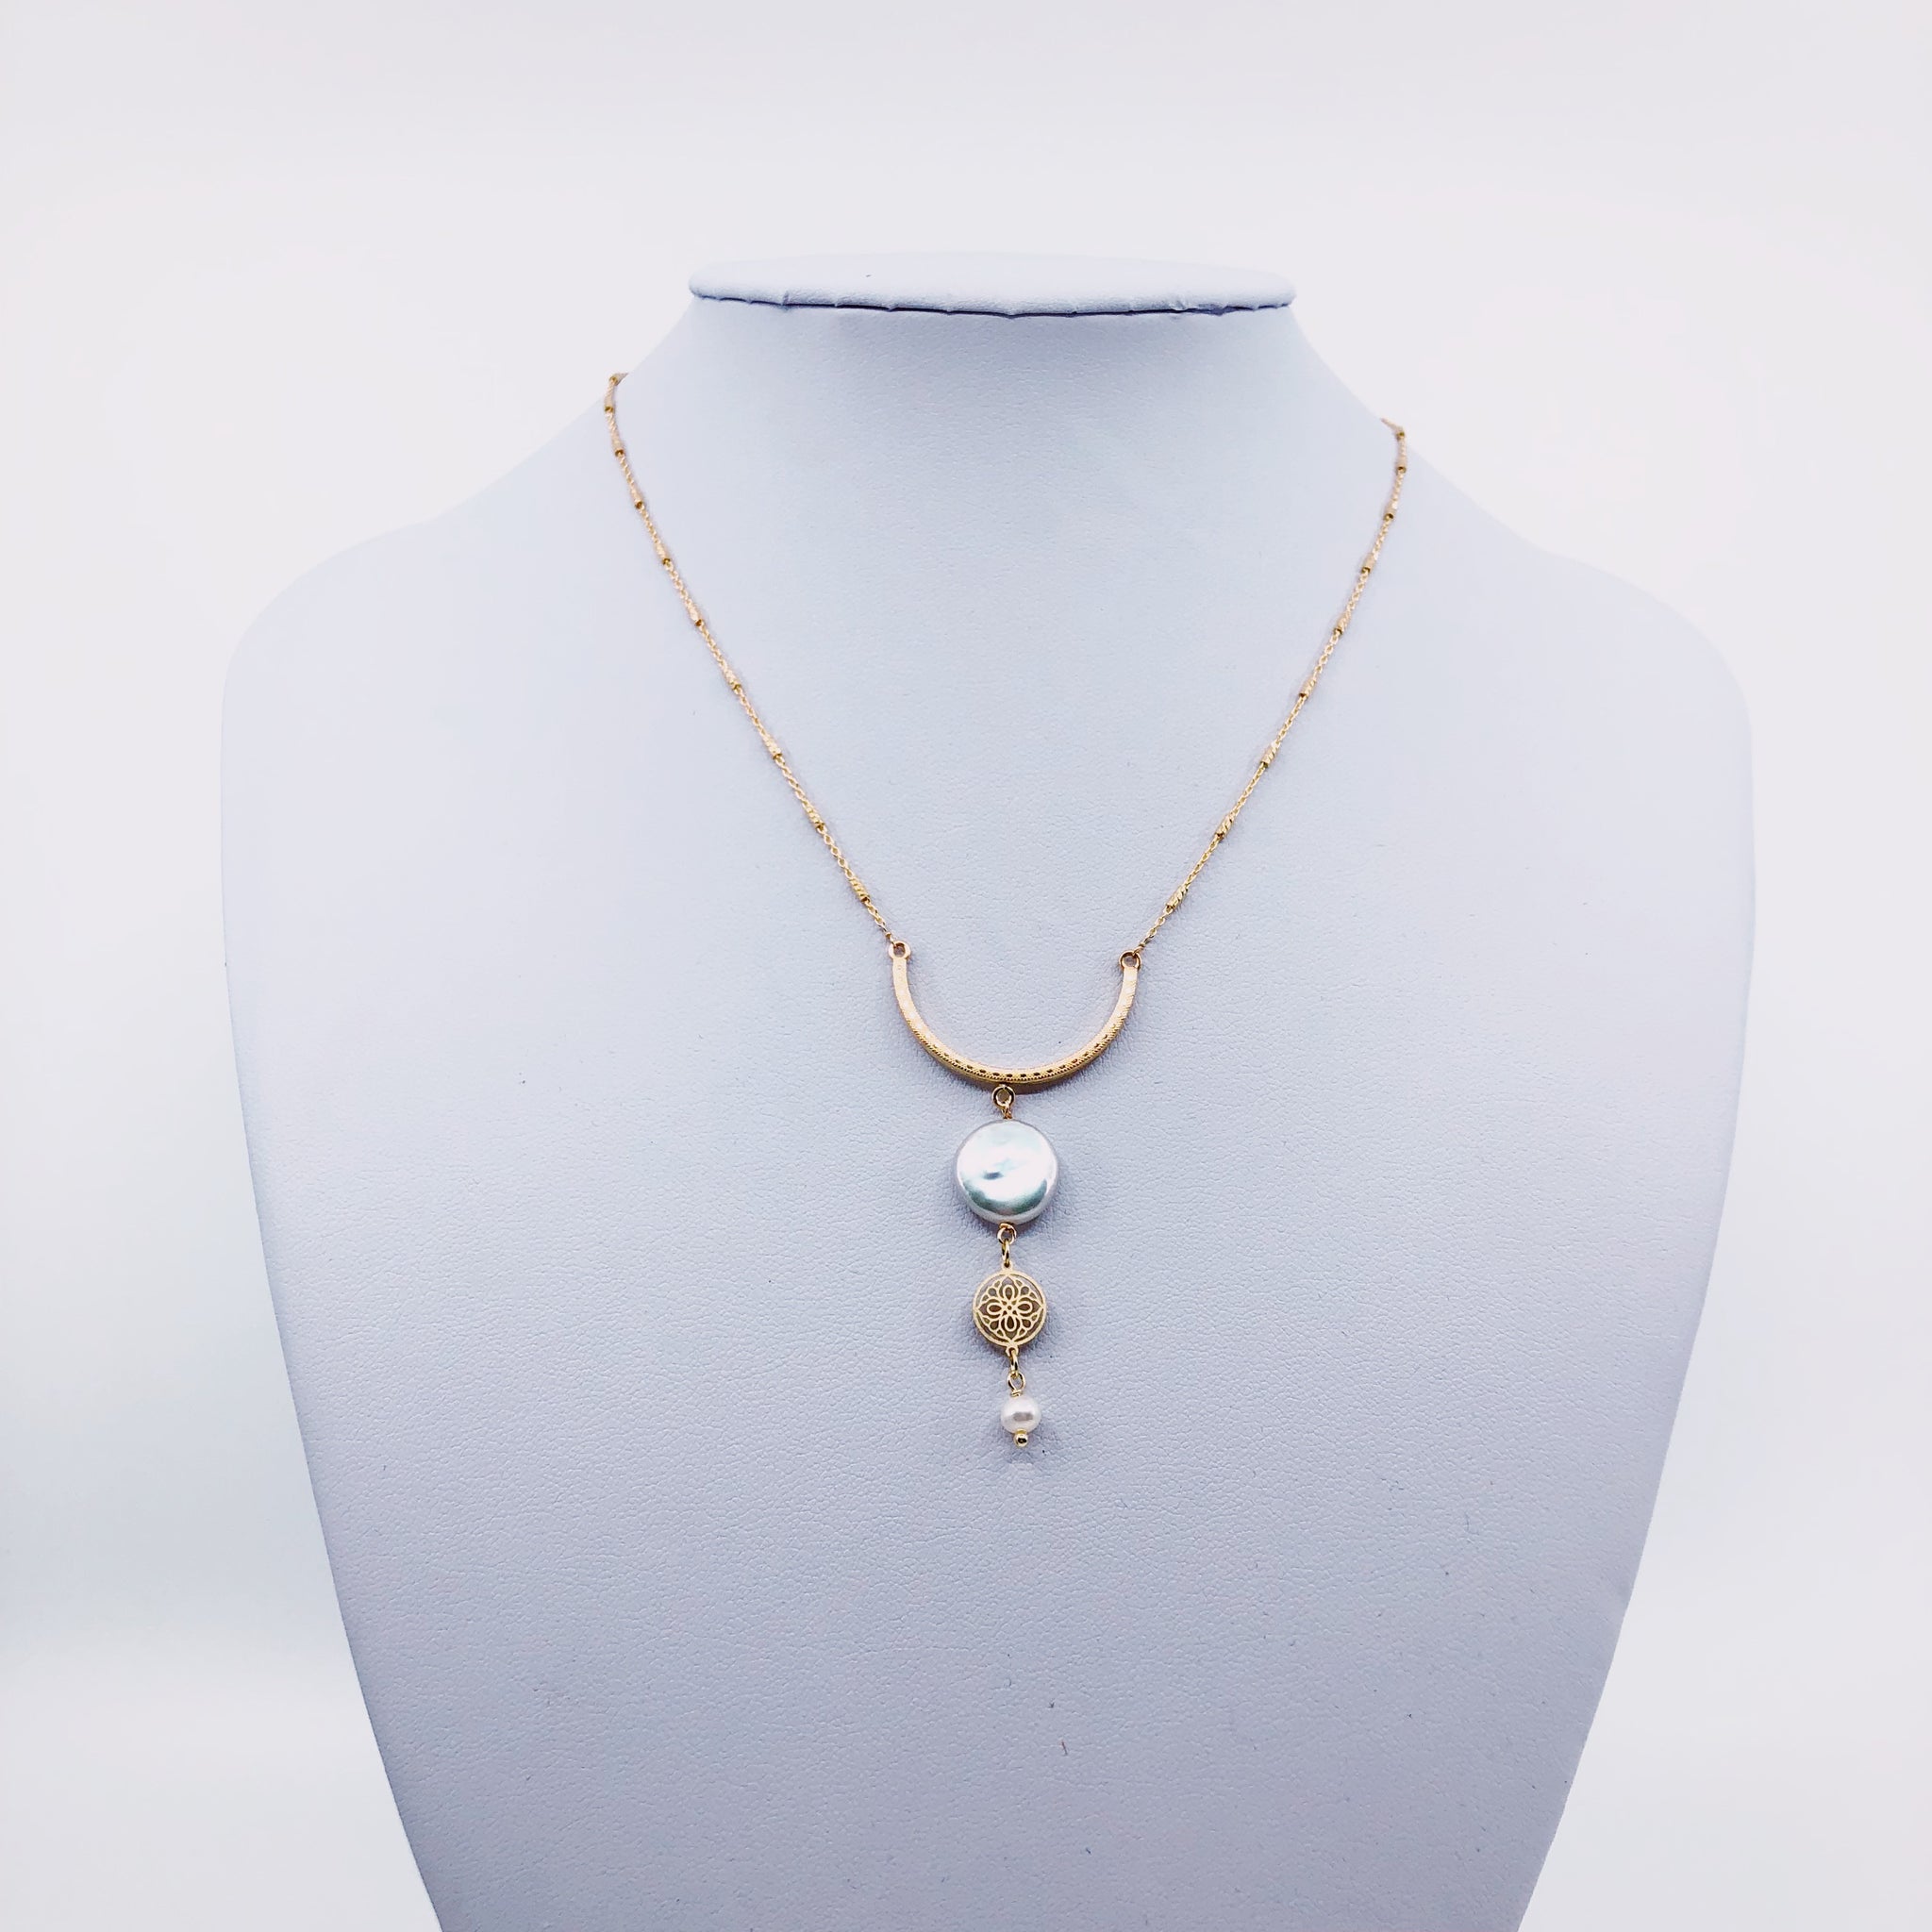 Moon Goddess | Asian Boutique Jewelry from New York | Yun Boutique